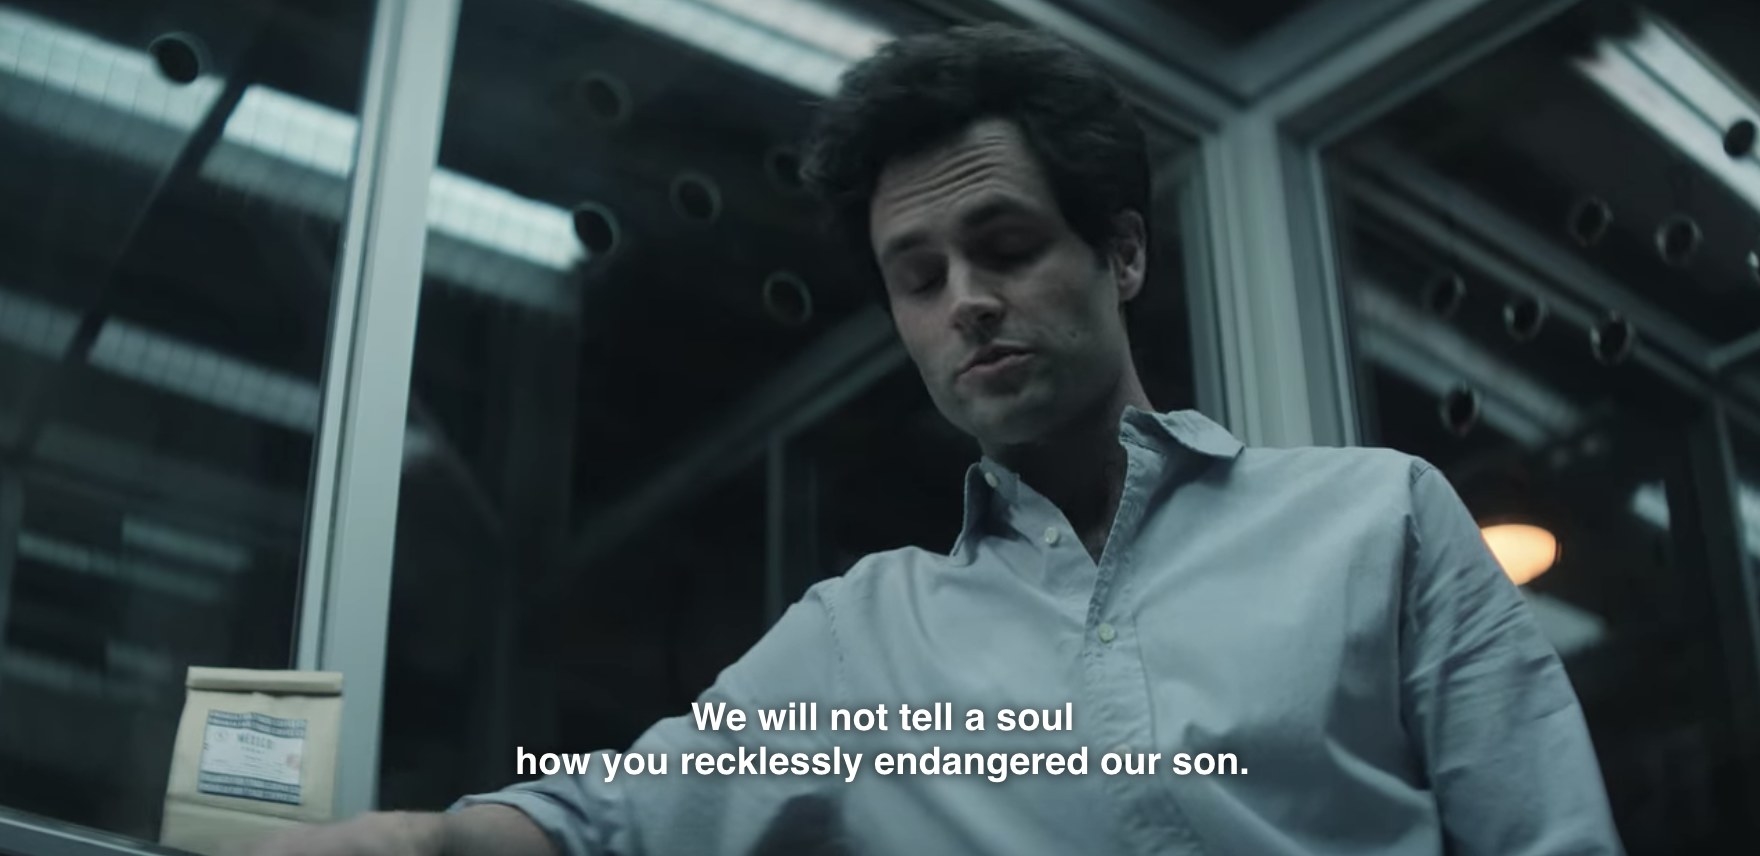 Joe (Penn Badgley)  talks to Gil, who is offscreen. The caption of what he says reads, We will not tell a soul how you recklessly endangered our son